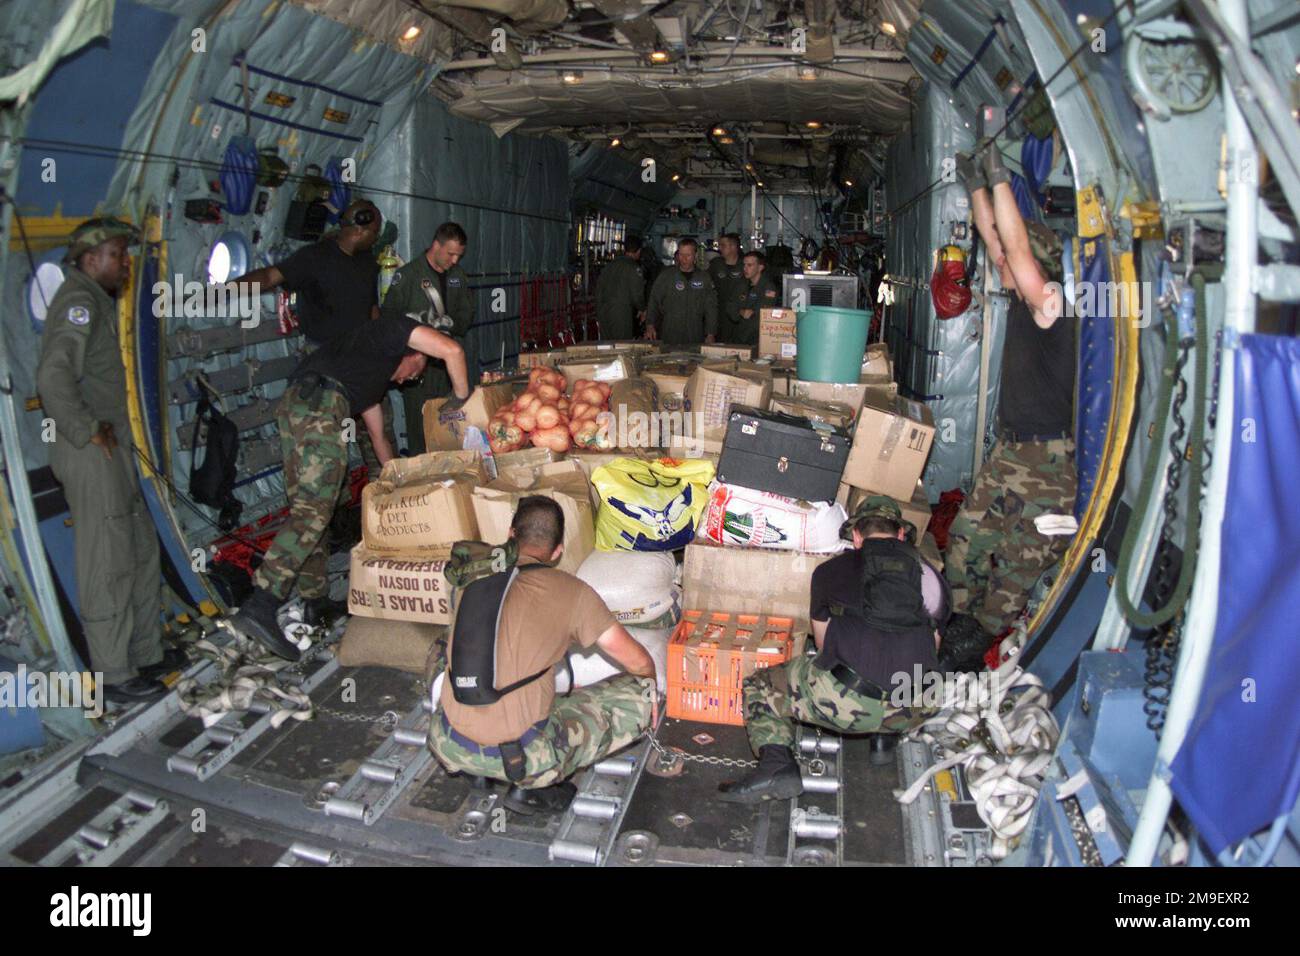 A C-130 Hercules interior medium shot as US Air Force members of the 86th Air Mobility Squadron, Ramstein Air Base, Germany, unload by hand 13,000 pounds of loose humanitarian refeif supplies at the International Airport at Maputo, Mozambique, Africa on 16 March 2000. This team is deployed here in support of Operation Atlas Response, a Humanitarian Aid Operation to help the people of Mozambique, after severe flooding (flooding and victims not shown) displaced over a million people from their homes. Subject Operation/Series: ATLAS RESPONSE Base: Maputo State: Inhambane Country: Mozambique (MOZ) Stock Photo